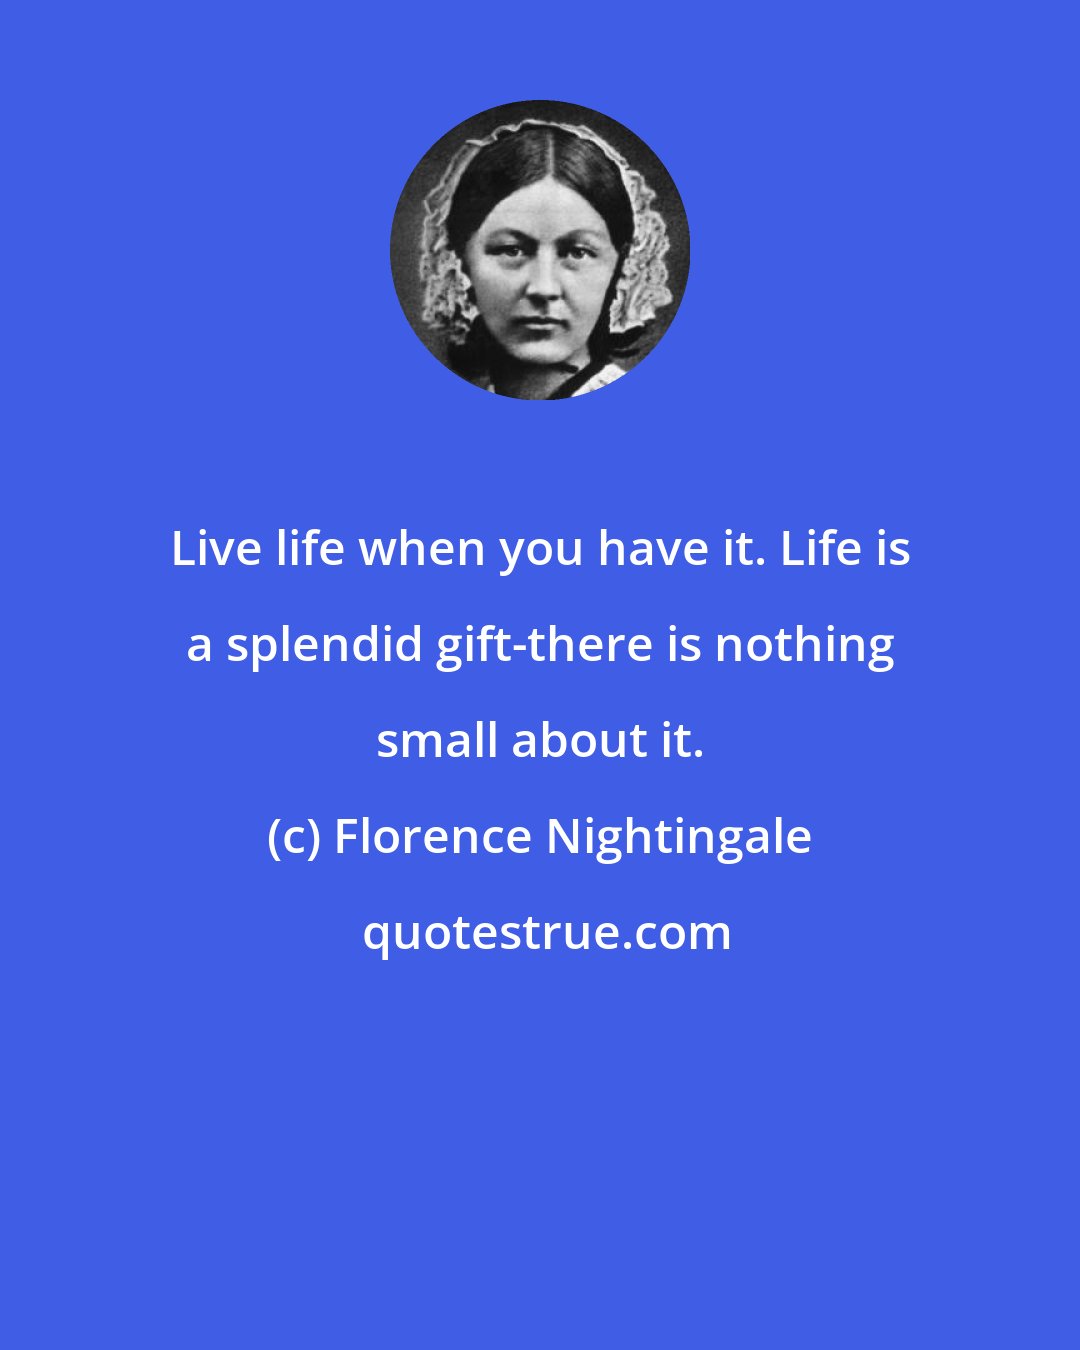 Florence Nightingale: Live life when you have it. Life is a splendid gift-there is nothing small about it.